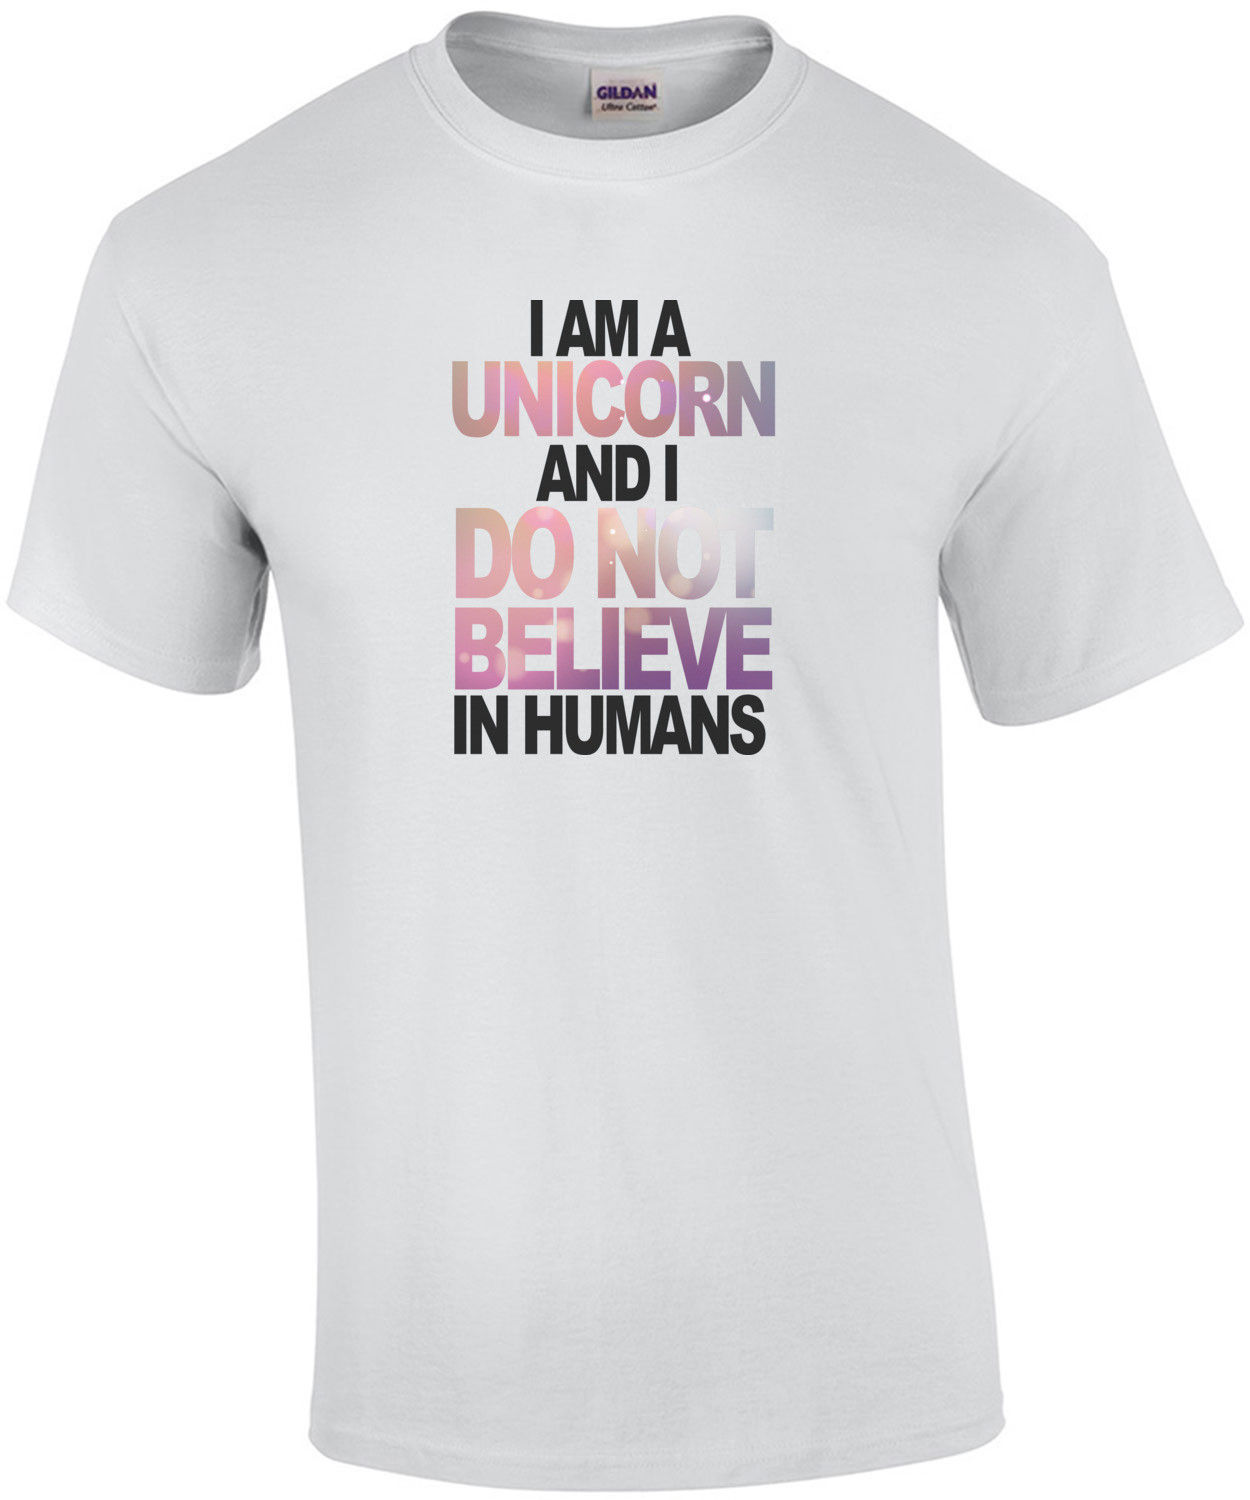 I am a unicorn and I do not believe in humans - Funny T-Shirt